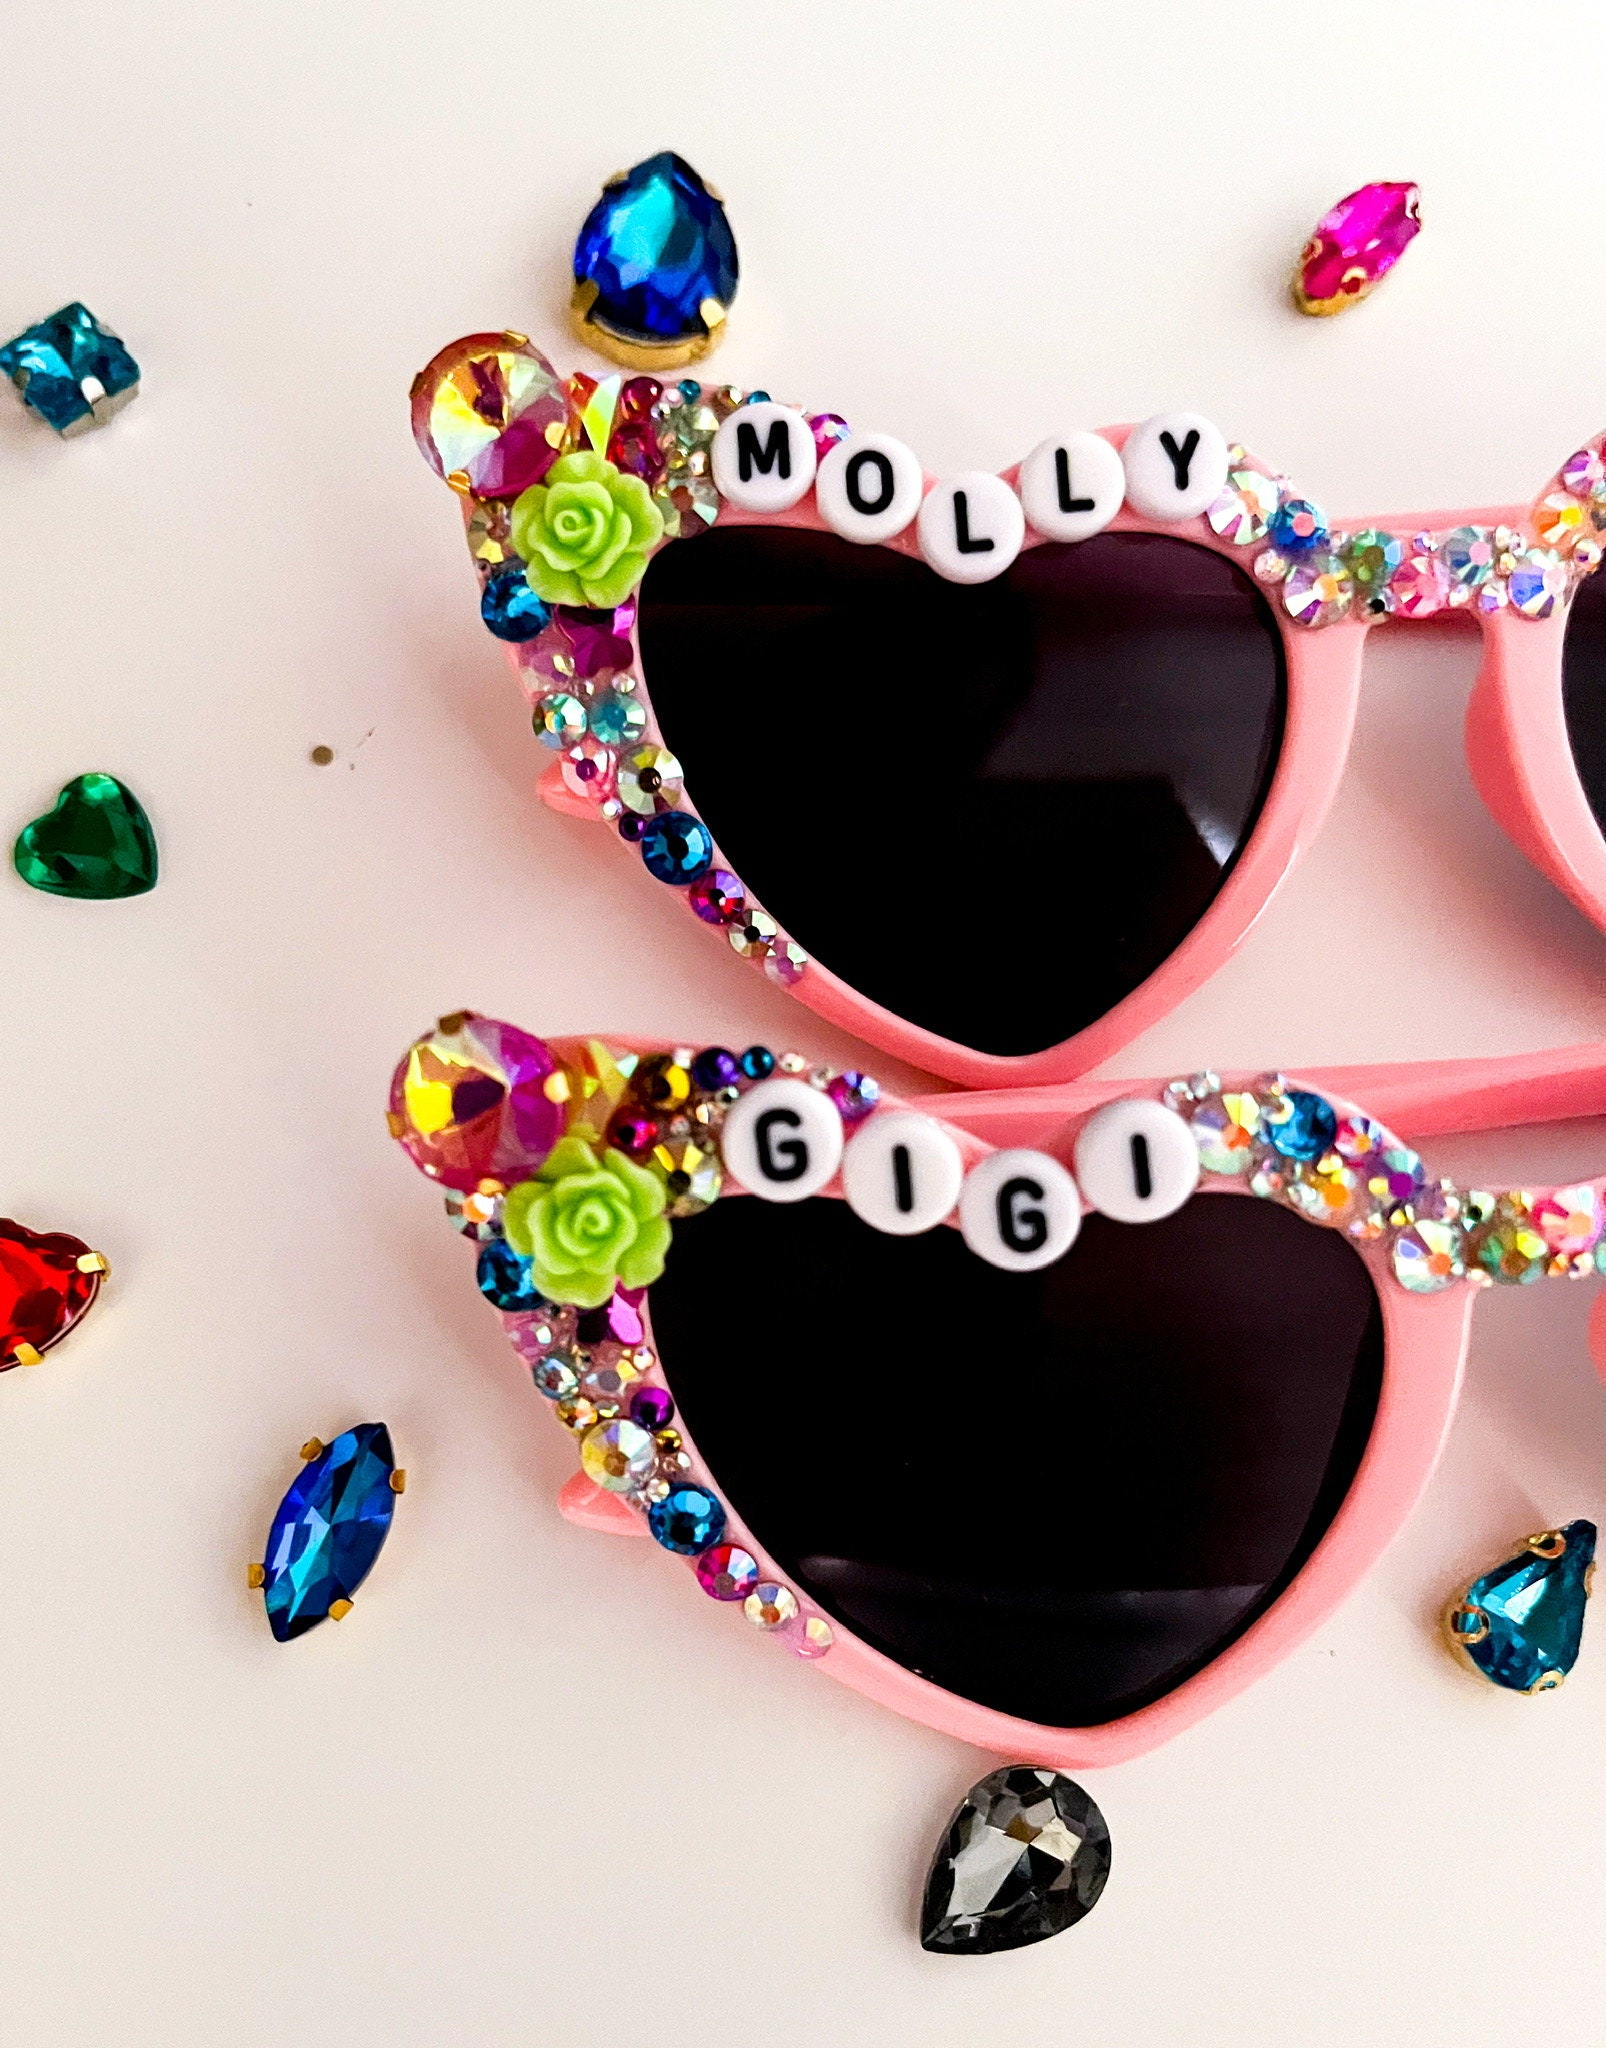 Bling Eyeglass Stands for Kids and the Young at Heart – ArtistGifts